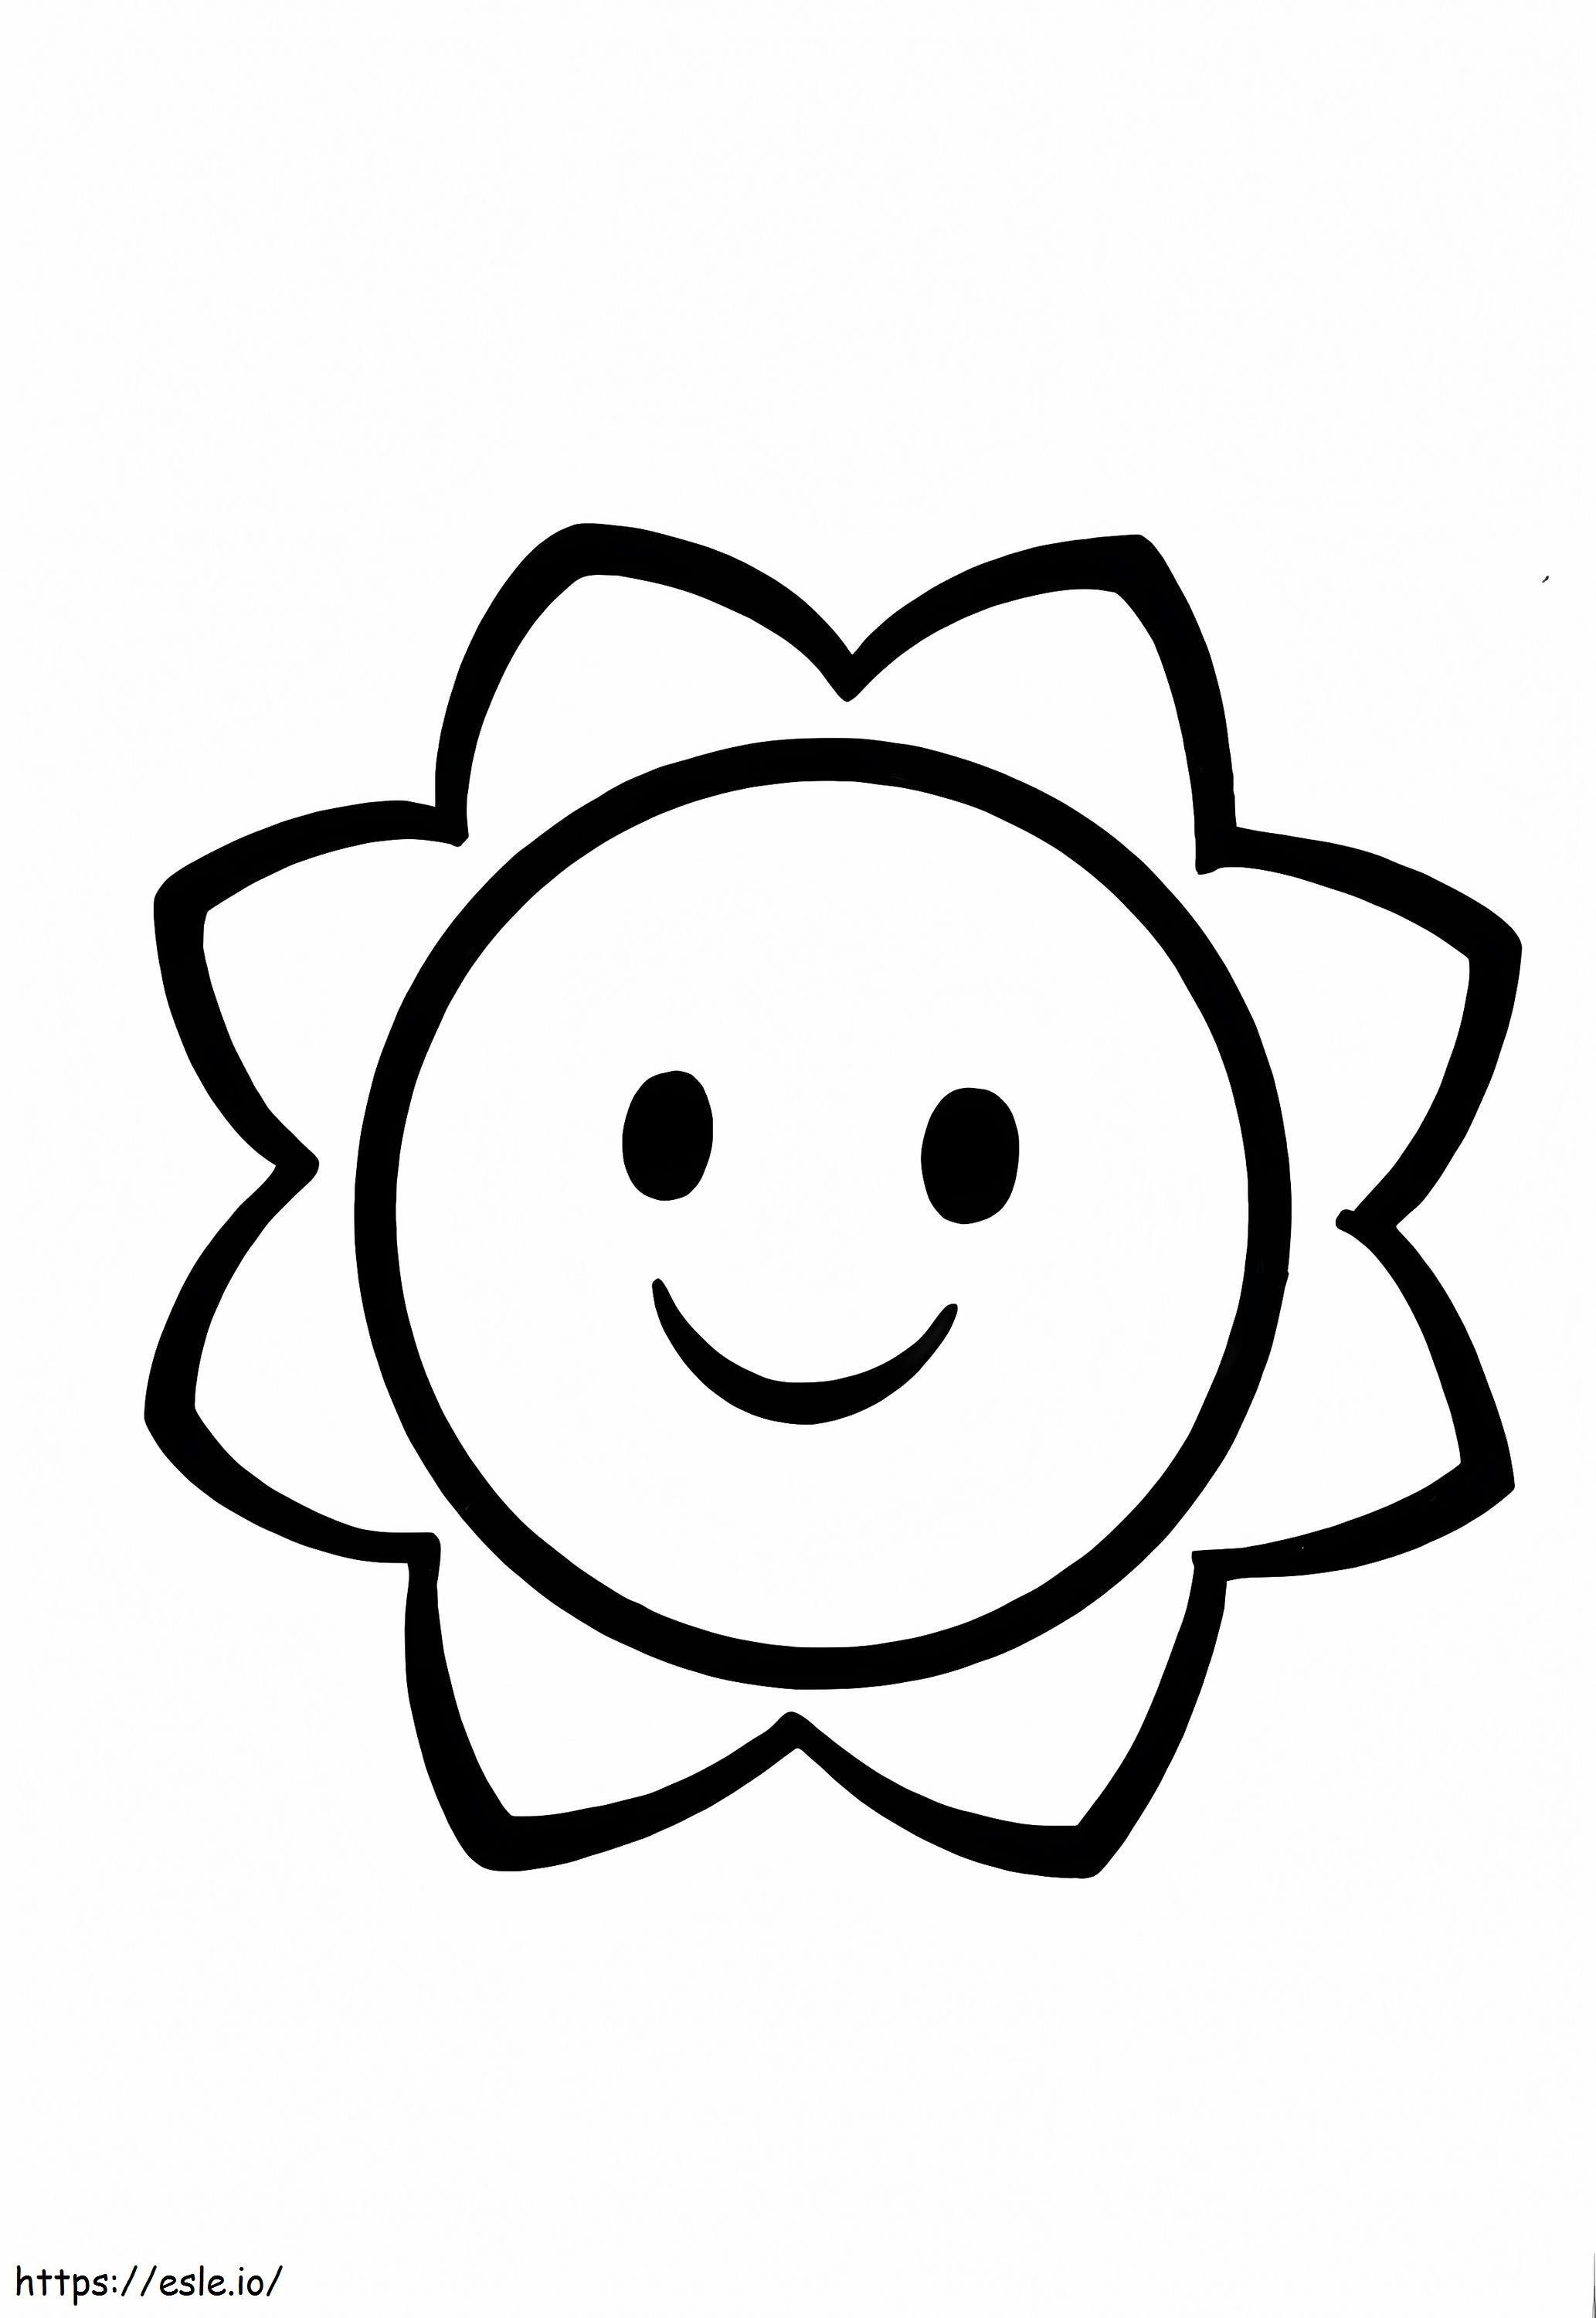 Lovely Flower For 1 Year Old Kids coloring page